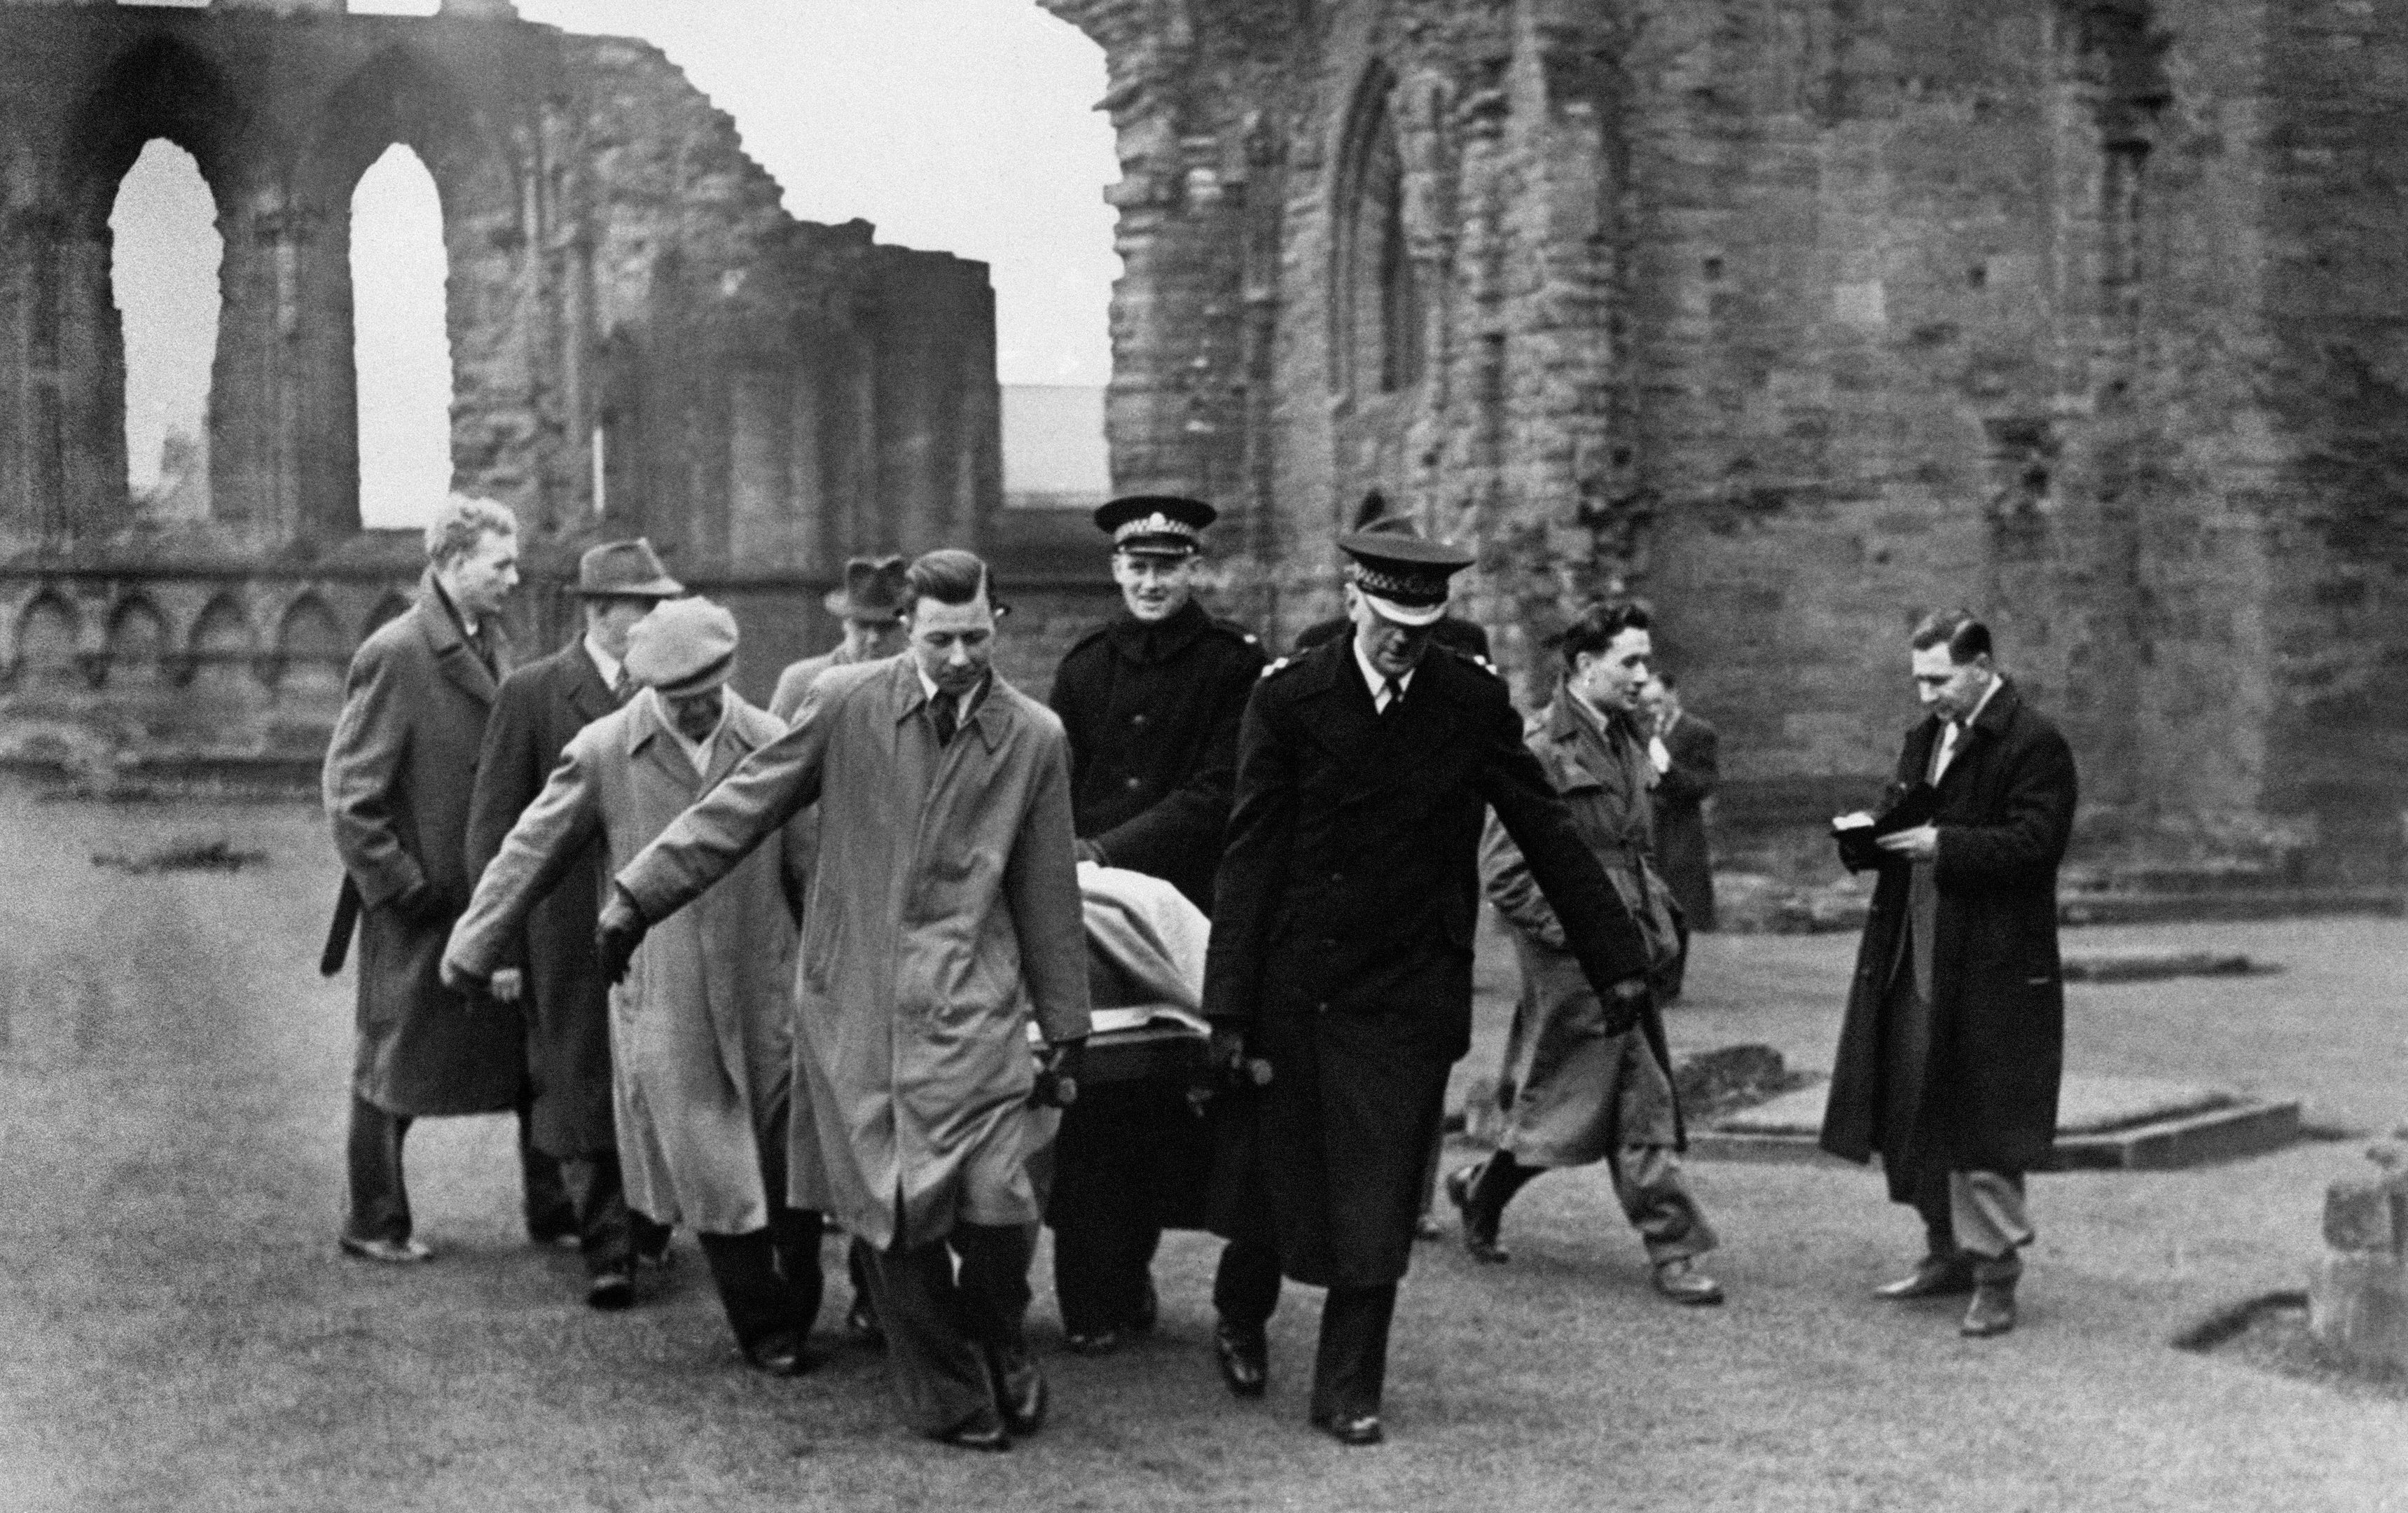 The Stone of Destiny being removed from Arbroath Abbey where it was found following its disappearance from Westminster Abbey in 1950 but could it be on the move again?